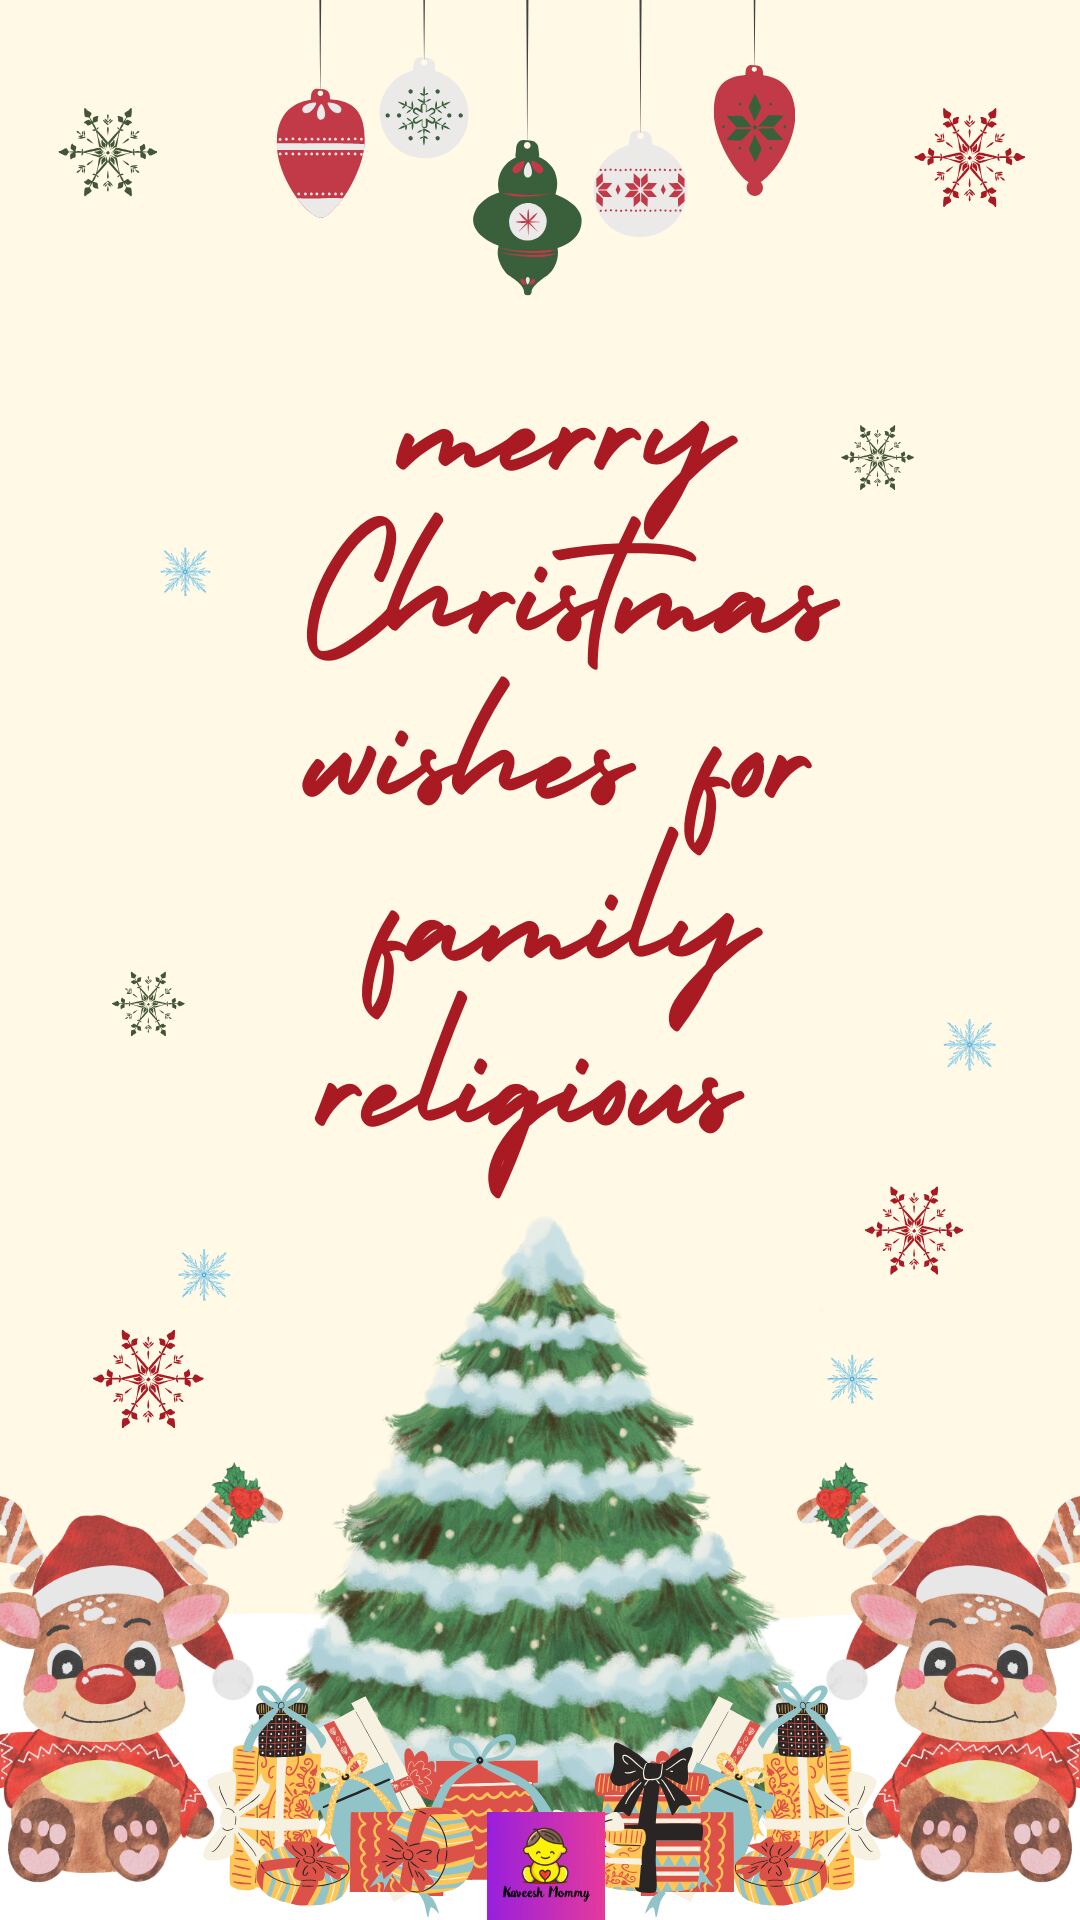 List of religious merry Christmas wishes for family 